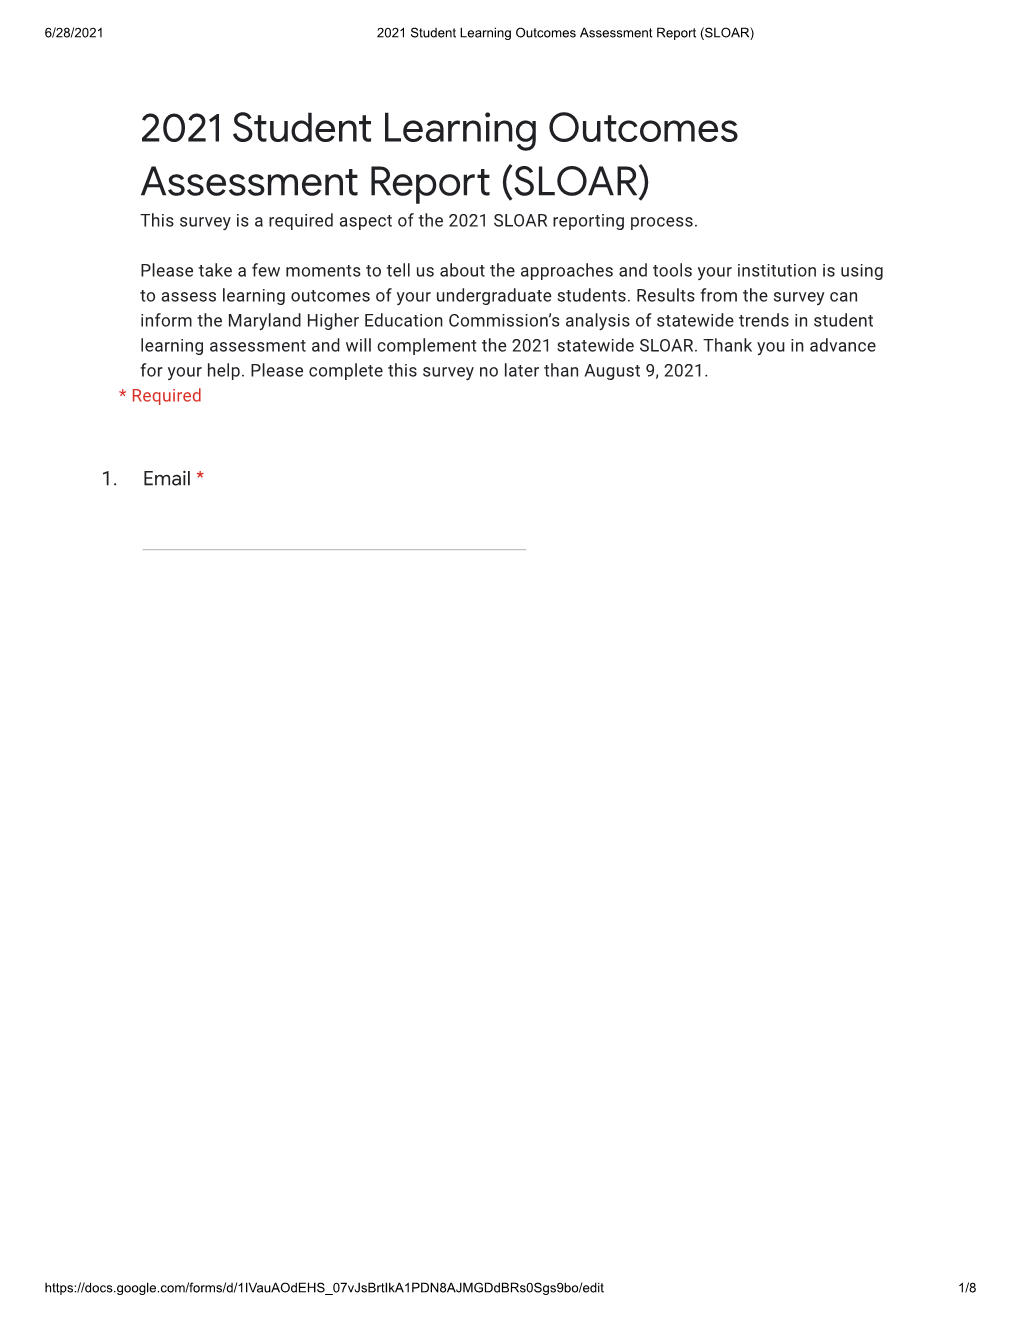 2021 Student Learning Outcomes Assessment Repo (SLOAR)